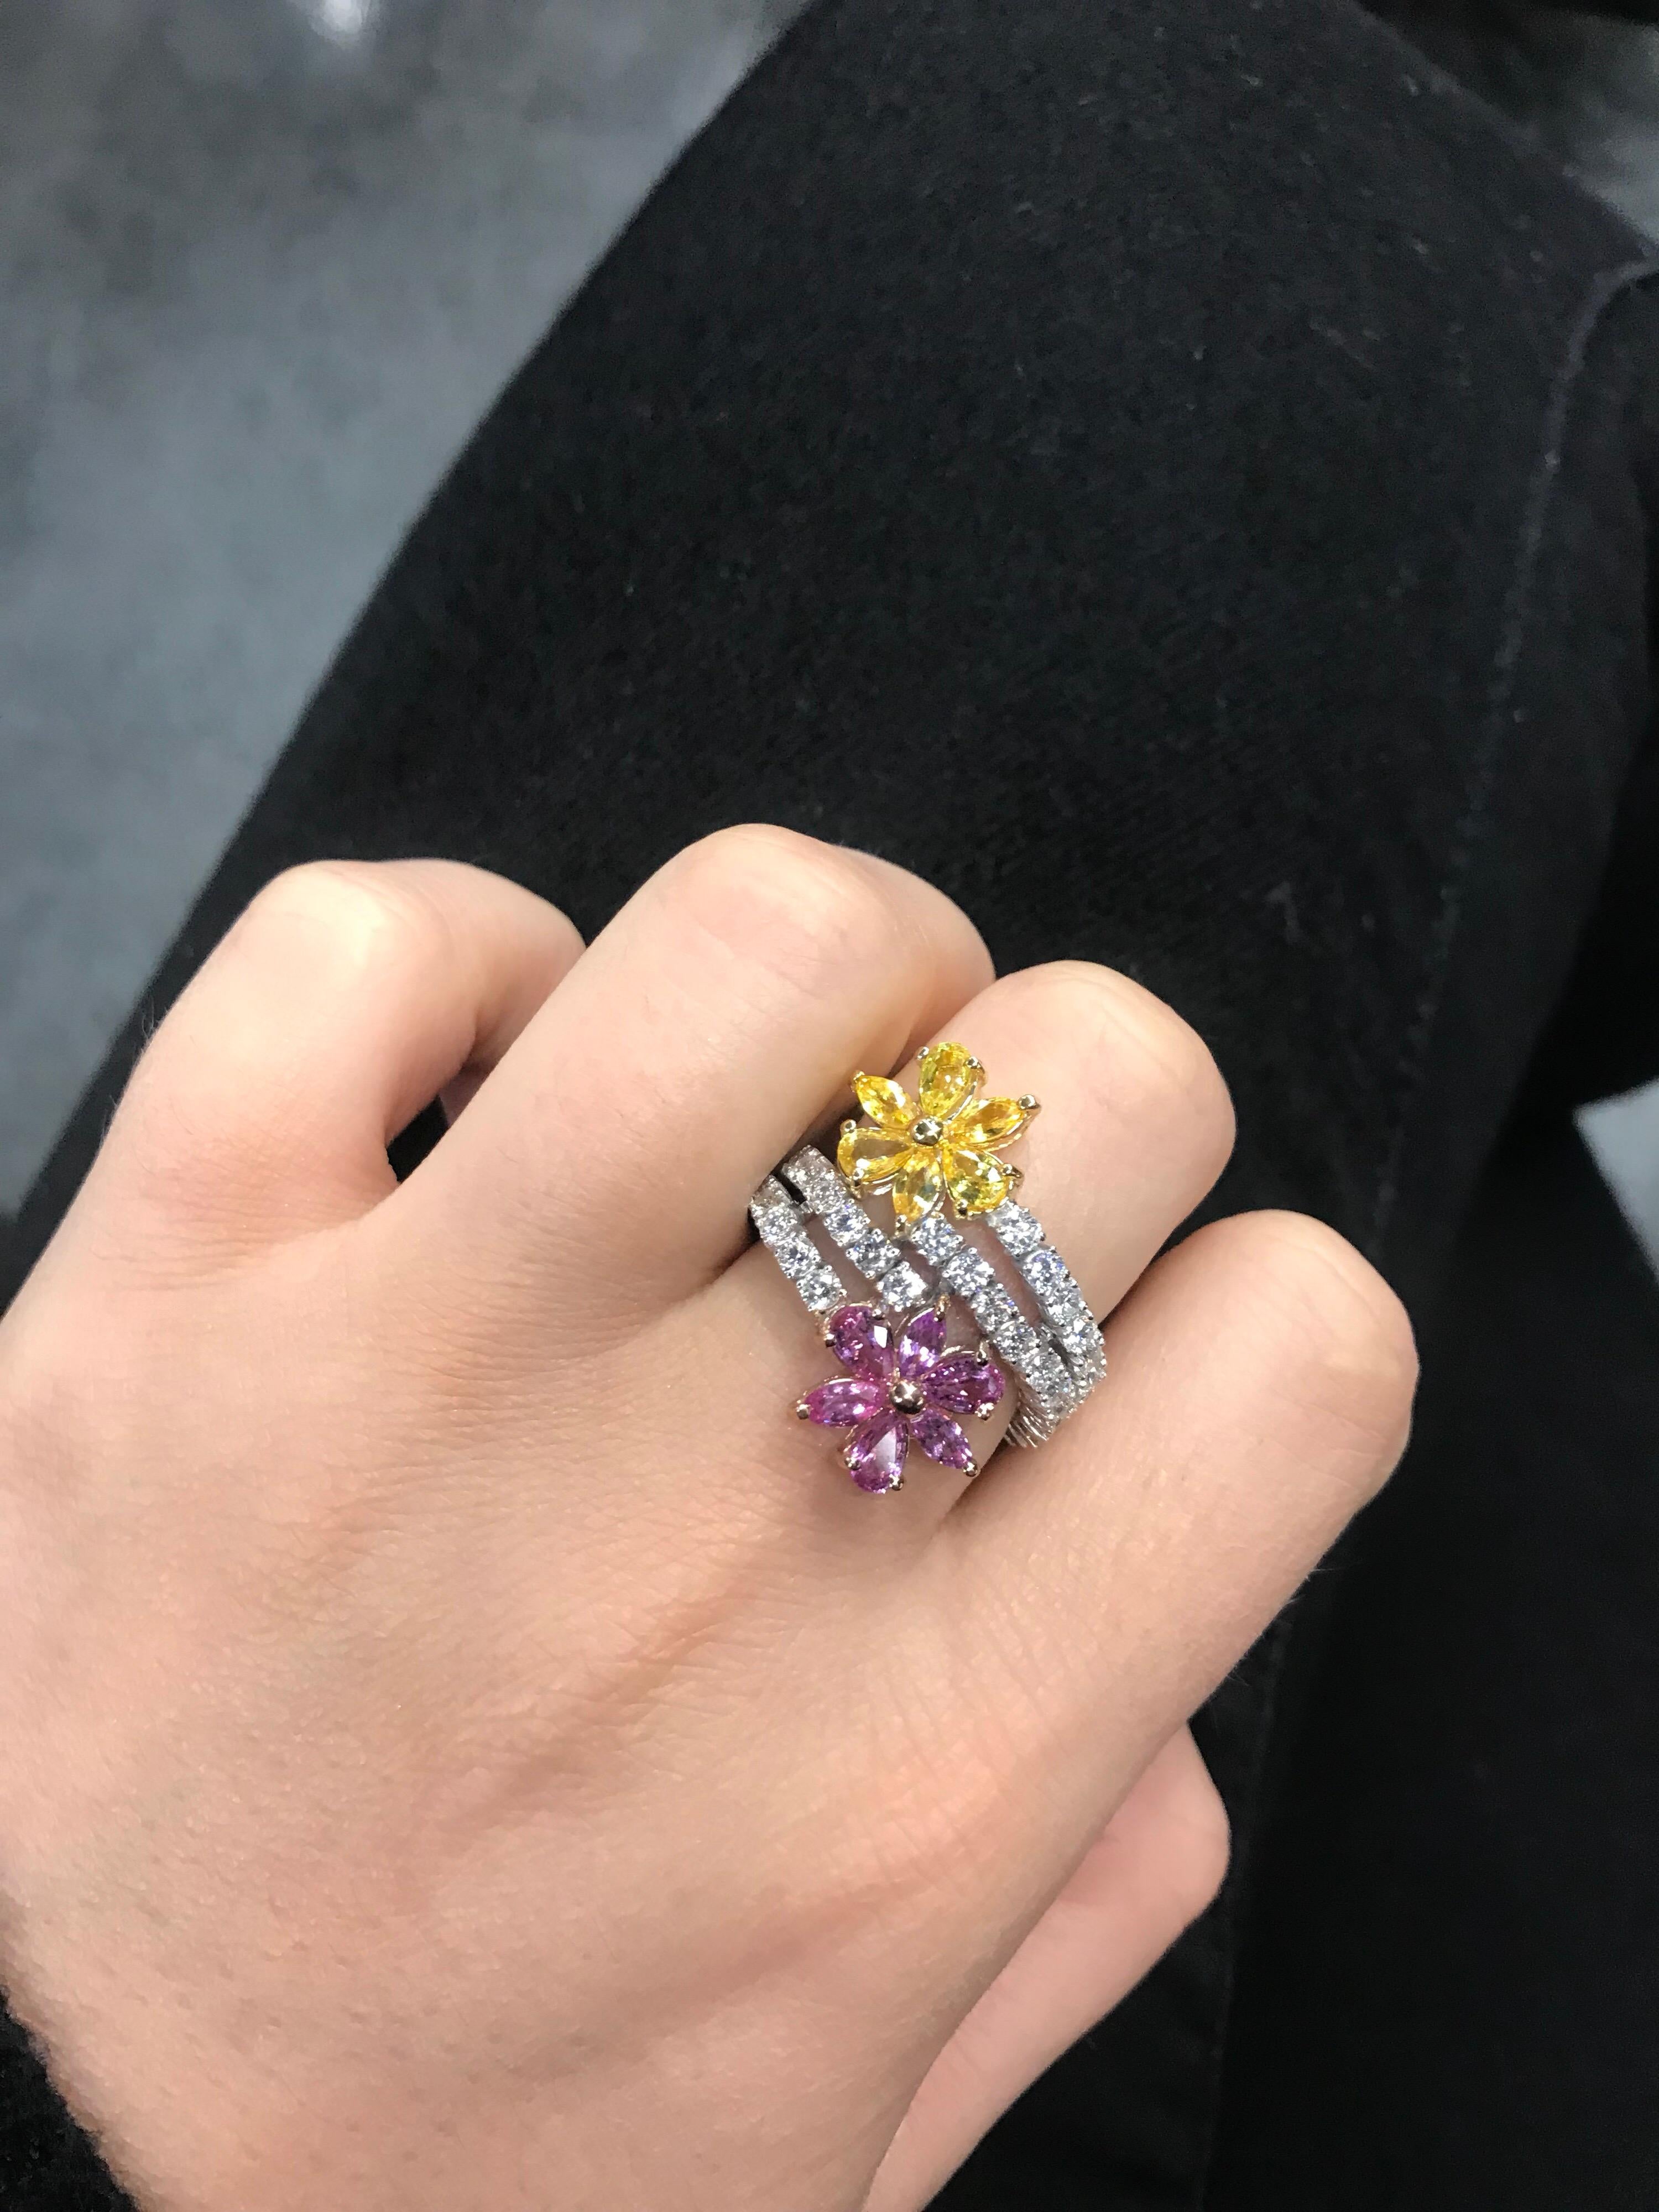 18k White gold ring featuring two pink and yellow floral motif sapphires weighing 2.68 carats on a flexible diamond wrapped band, 2.08 carats.
Color: G-H
Clarity: SI
Very comfortable on the finger! 
Can be customized to any gemstone.